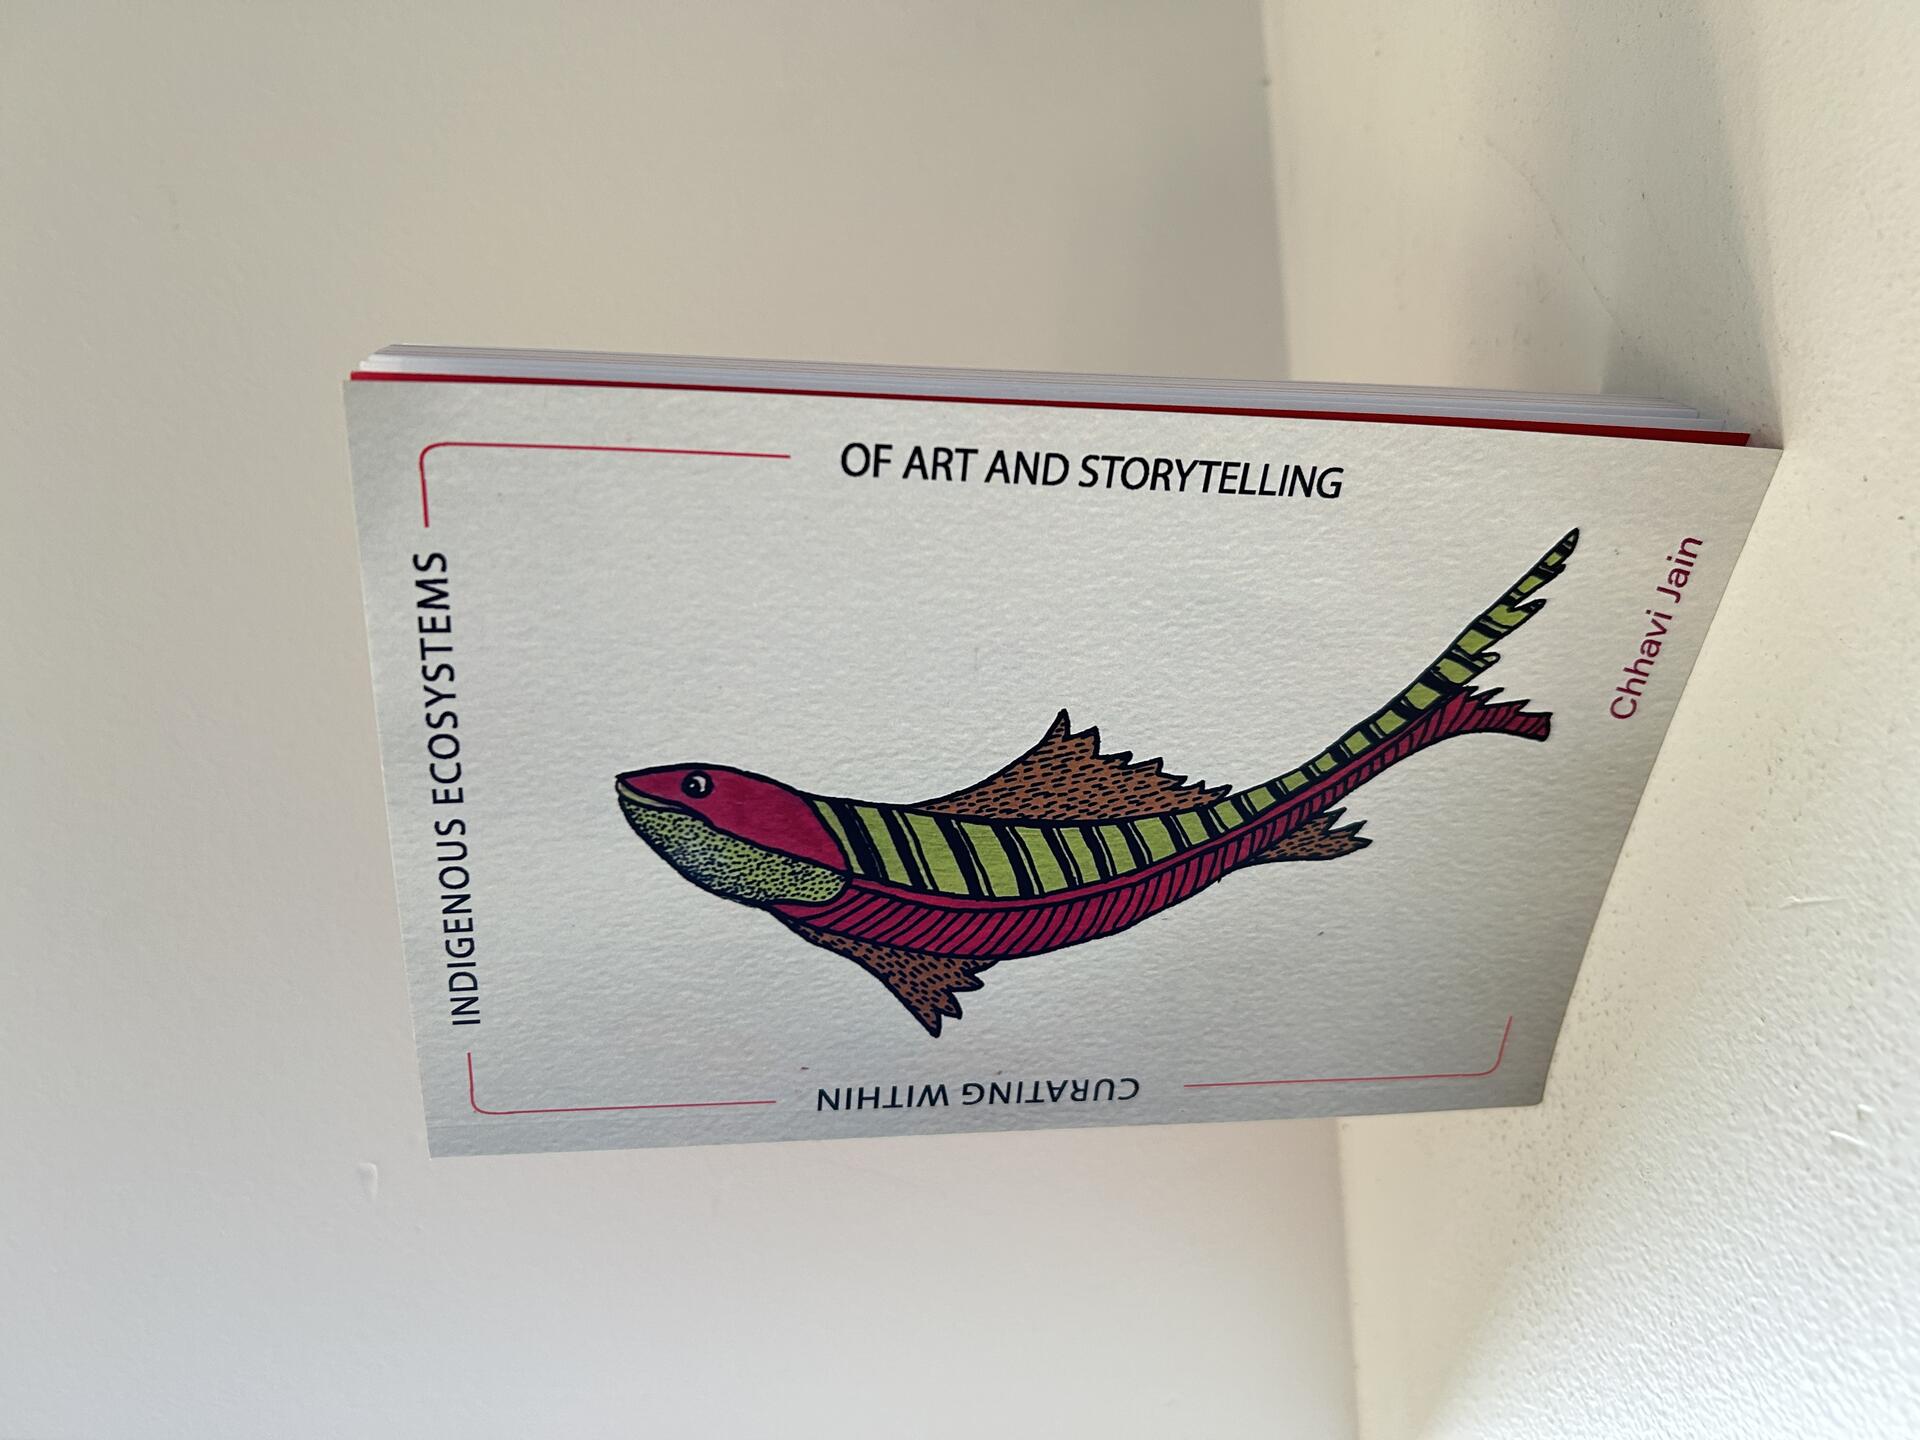 Image of the Book featuring an artwork- pink and green fish looking upwards.